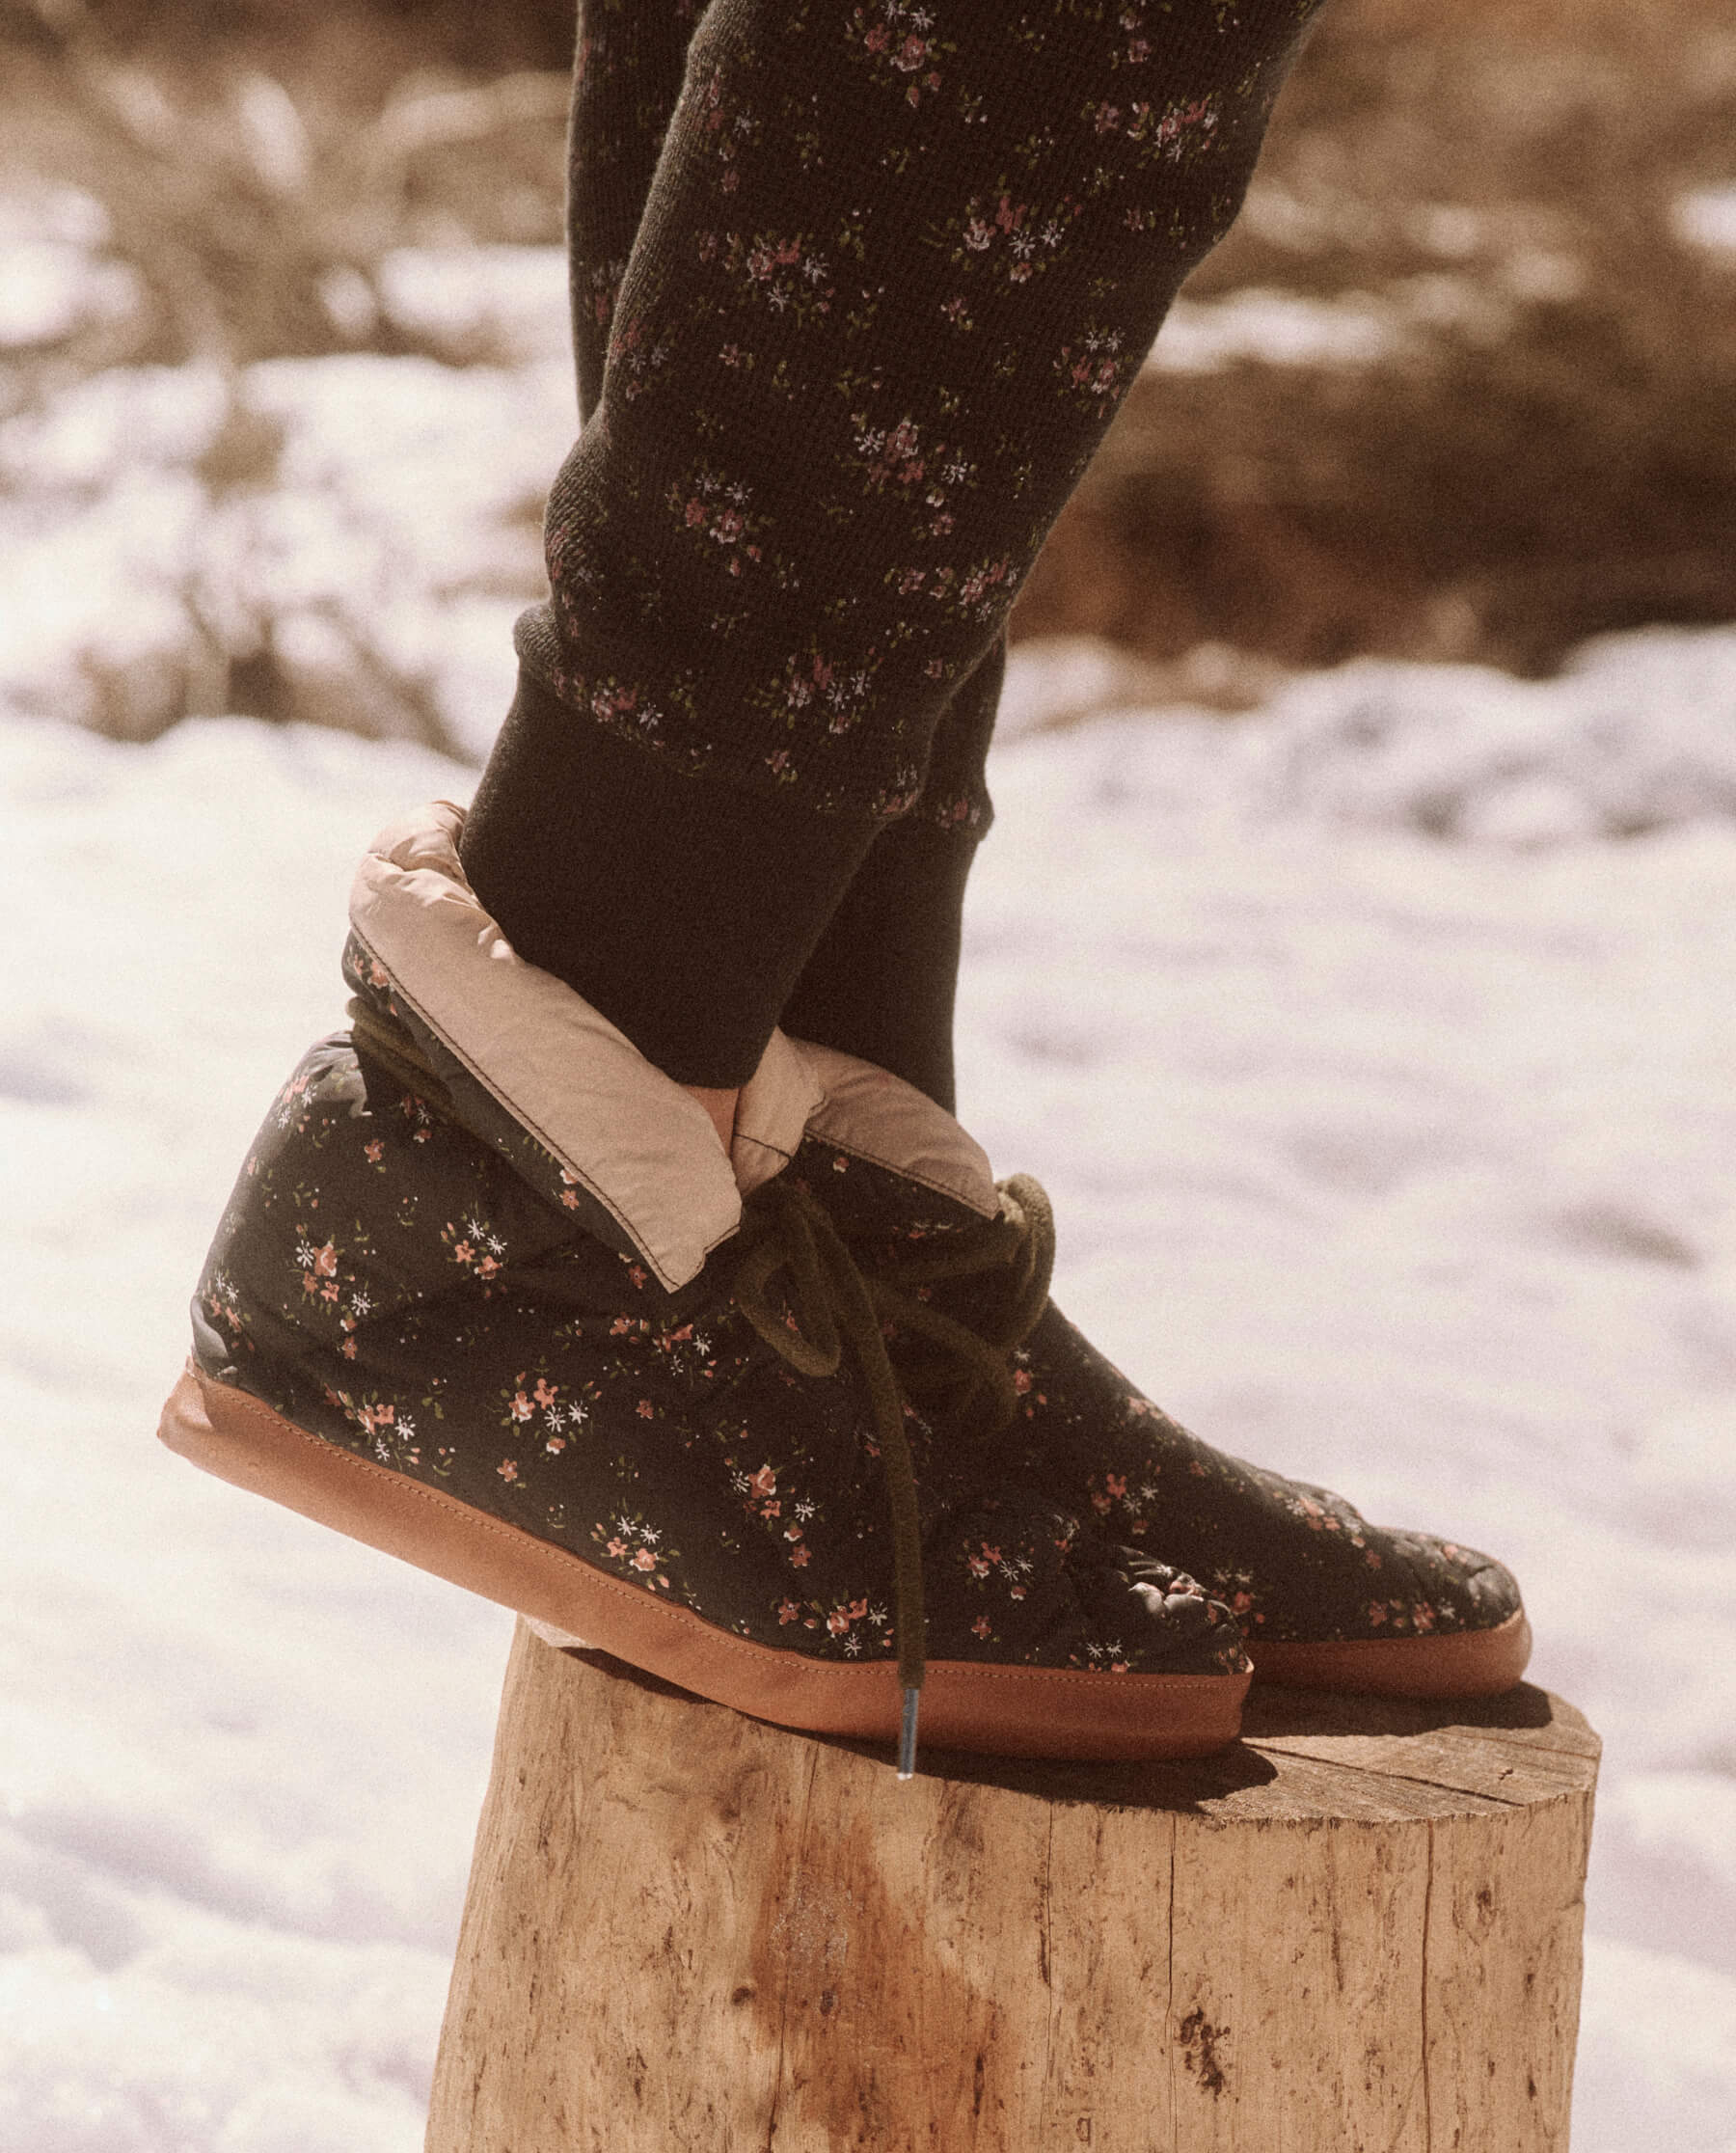 The Down Quilted Puffer Slipper. -- Wilderness Floral and Powder Pink